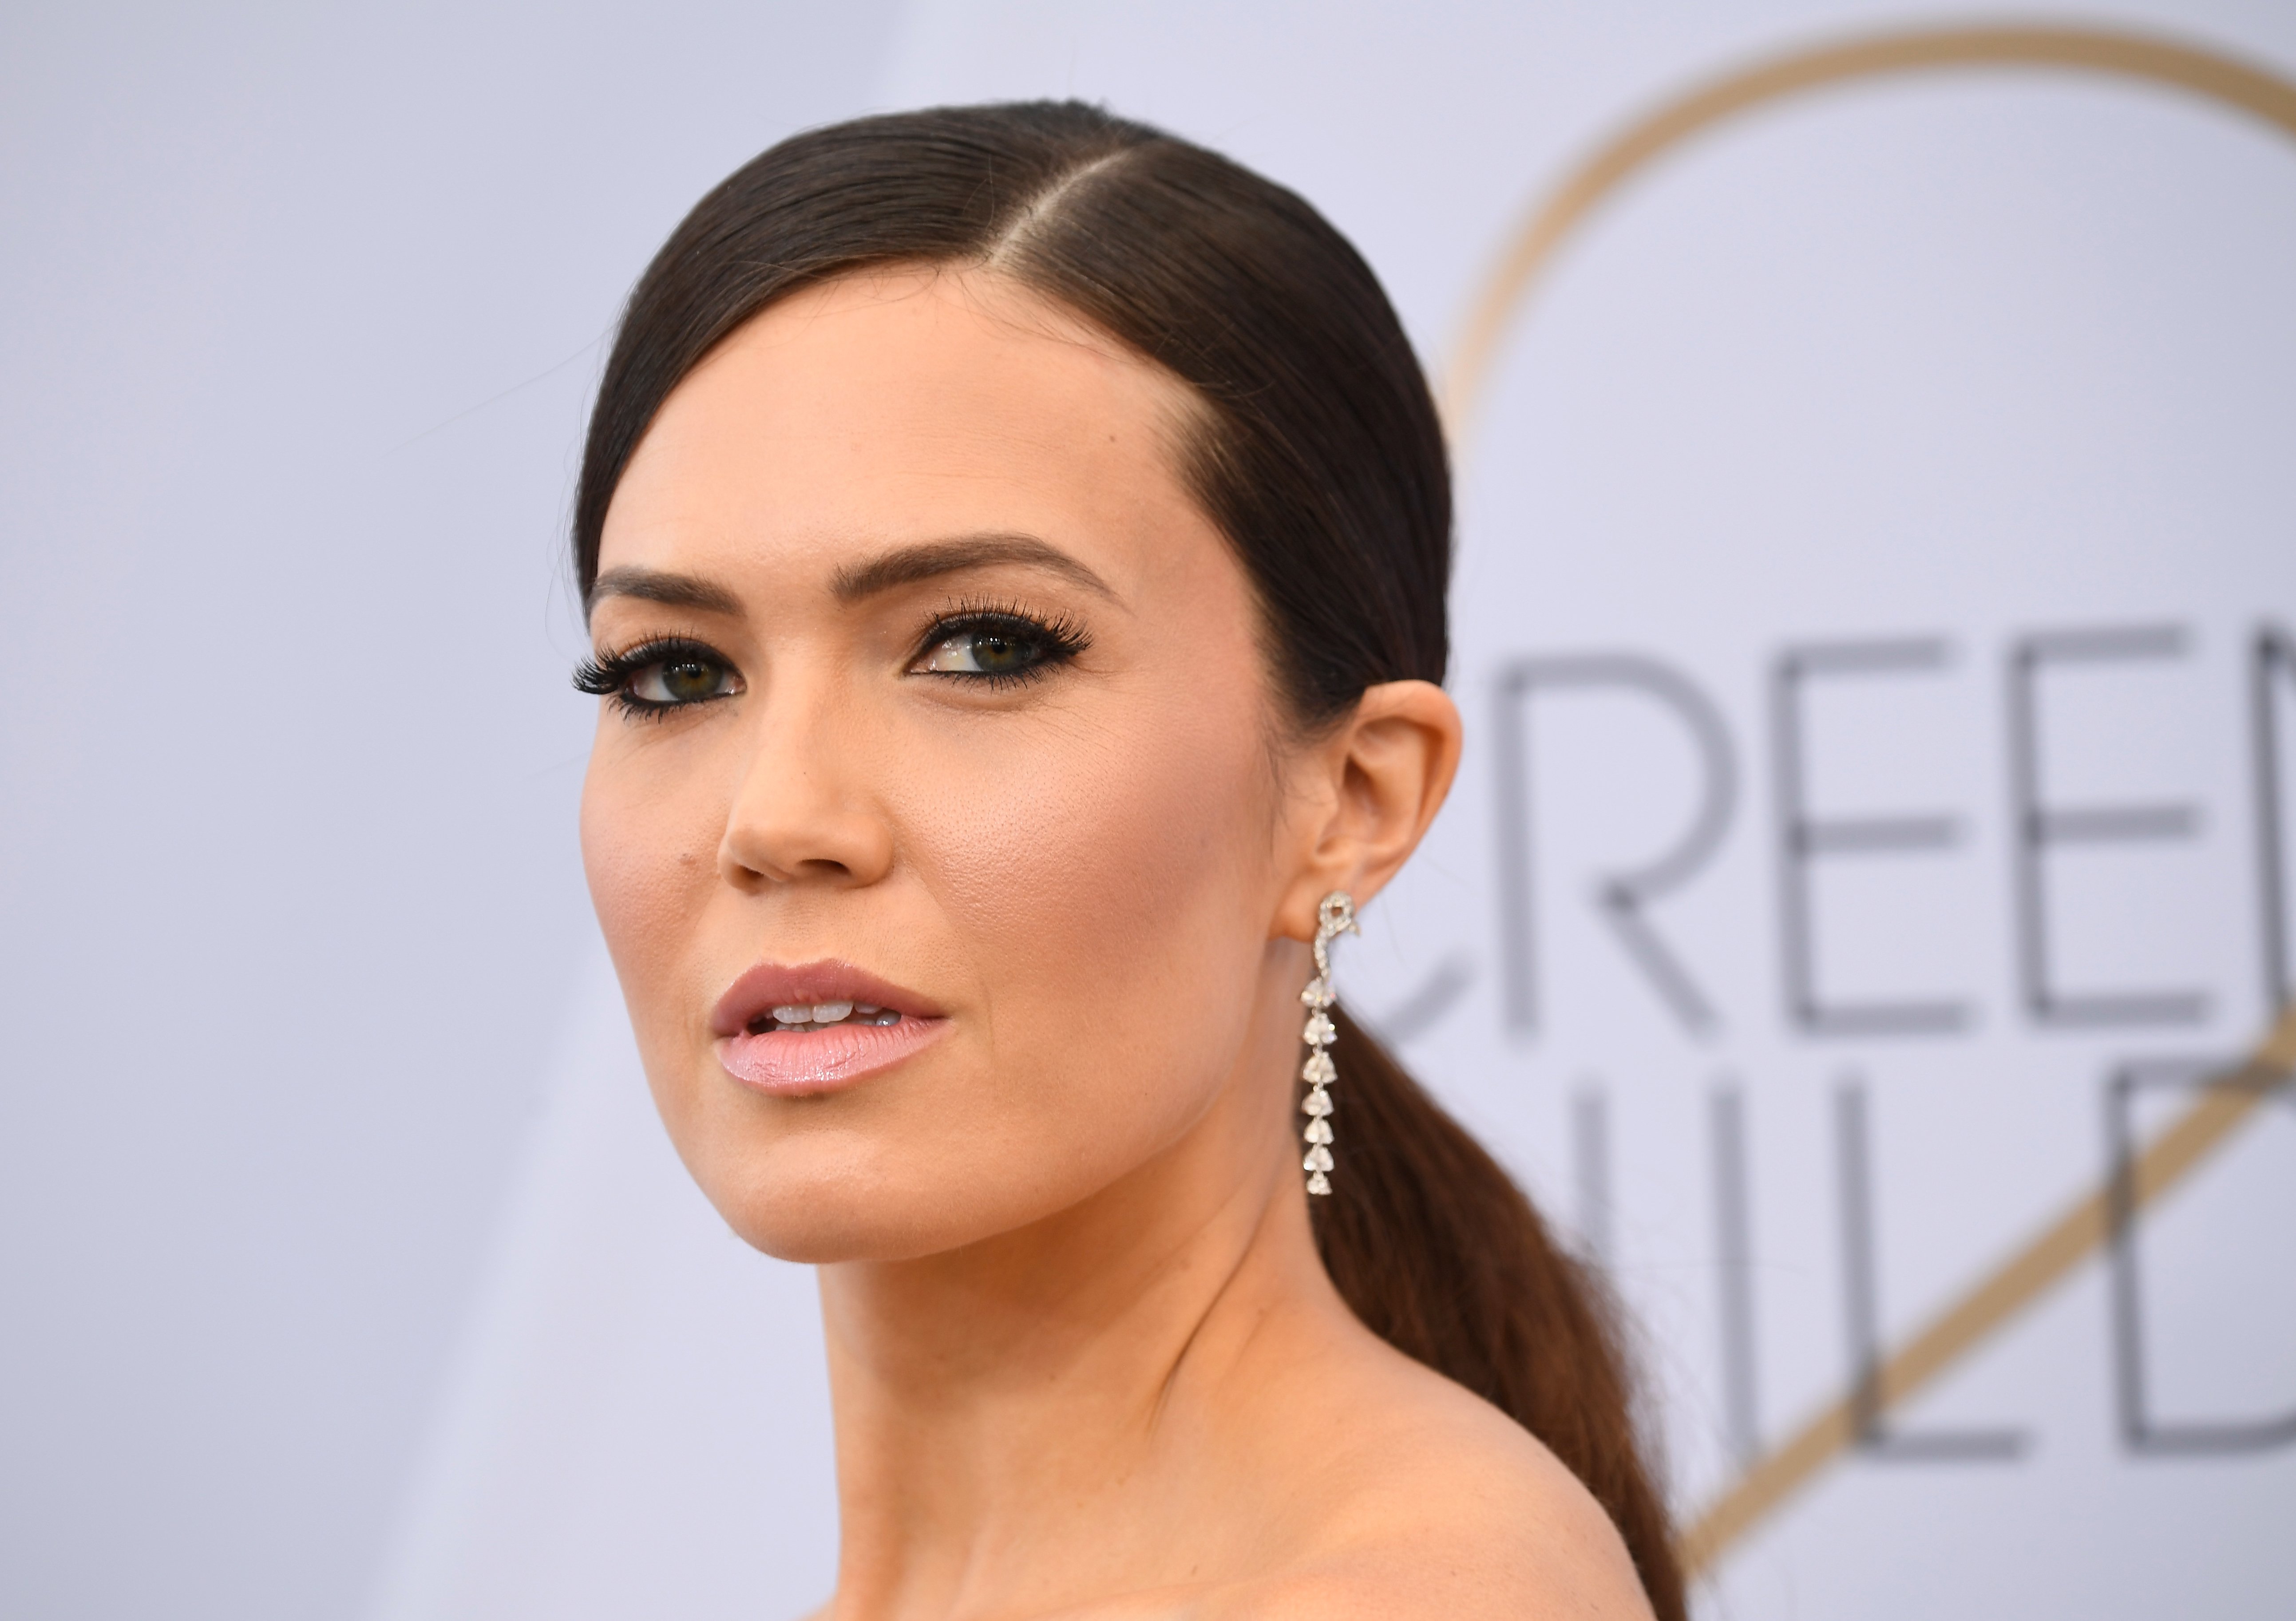  Mandy Moore attends the 25th Annual Screen Actors Guild Awards at The Shrine Auditorium on January 27, 2019 in Los Angeles, California | Source: Getty Images